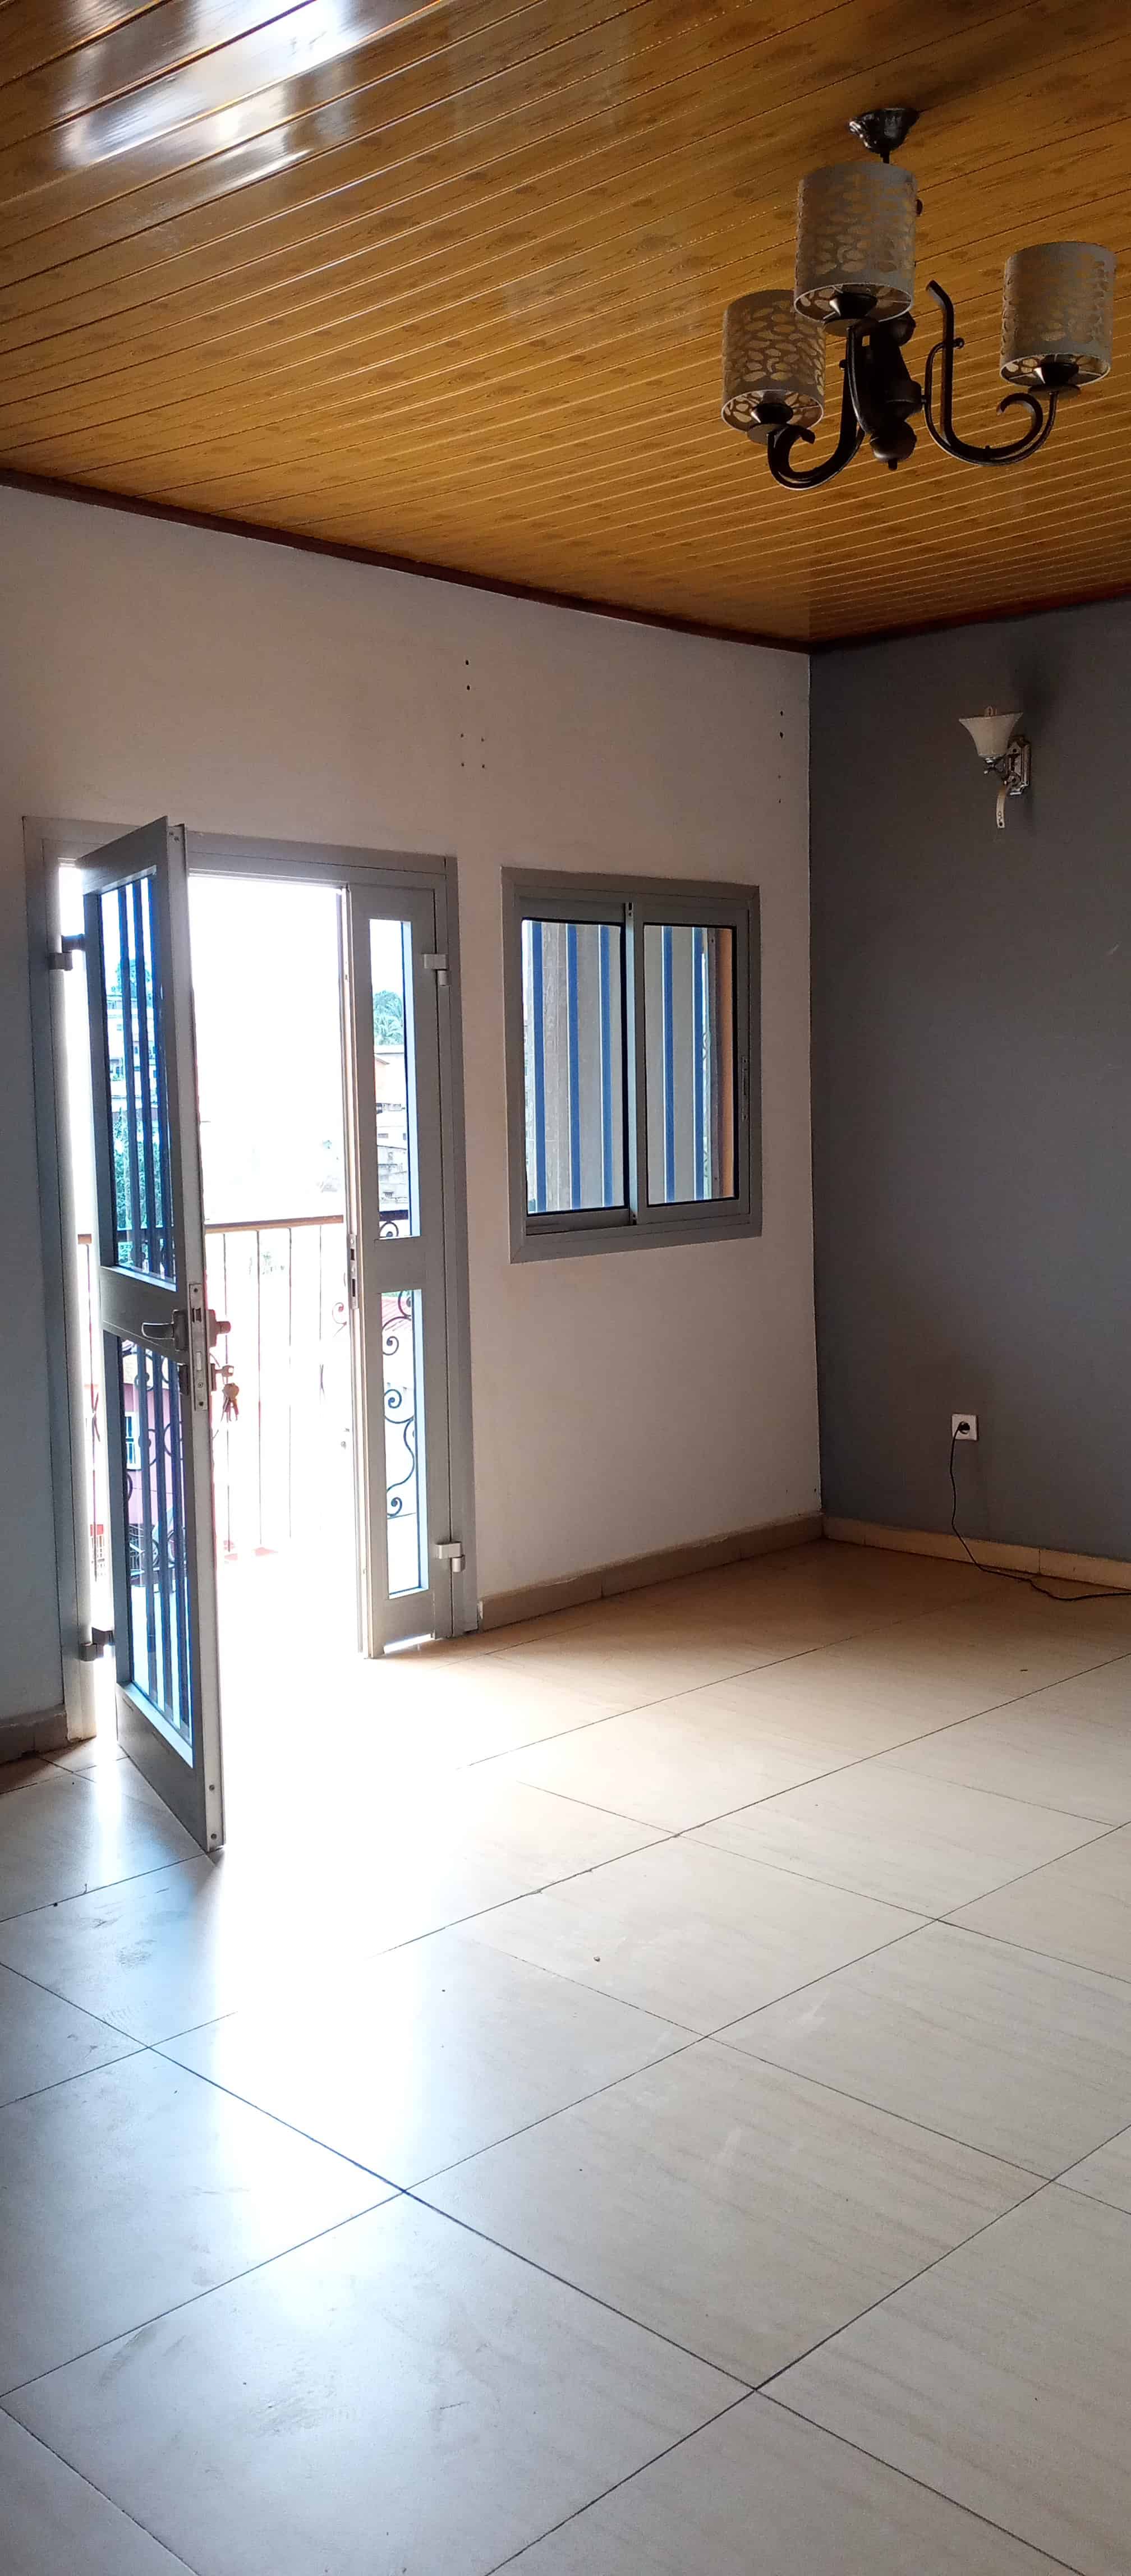 Apartment to rent - Yaoundé, Mfandena, Titigarage - 1 living room(s), 2 bedroom(s), 1 bathroom(s) - 150 000 FCFA / month